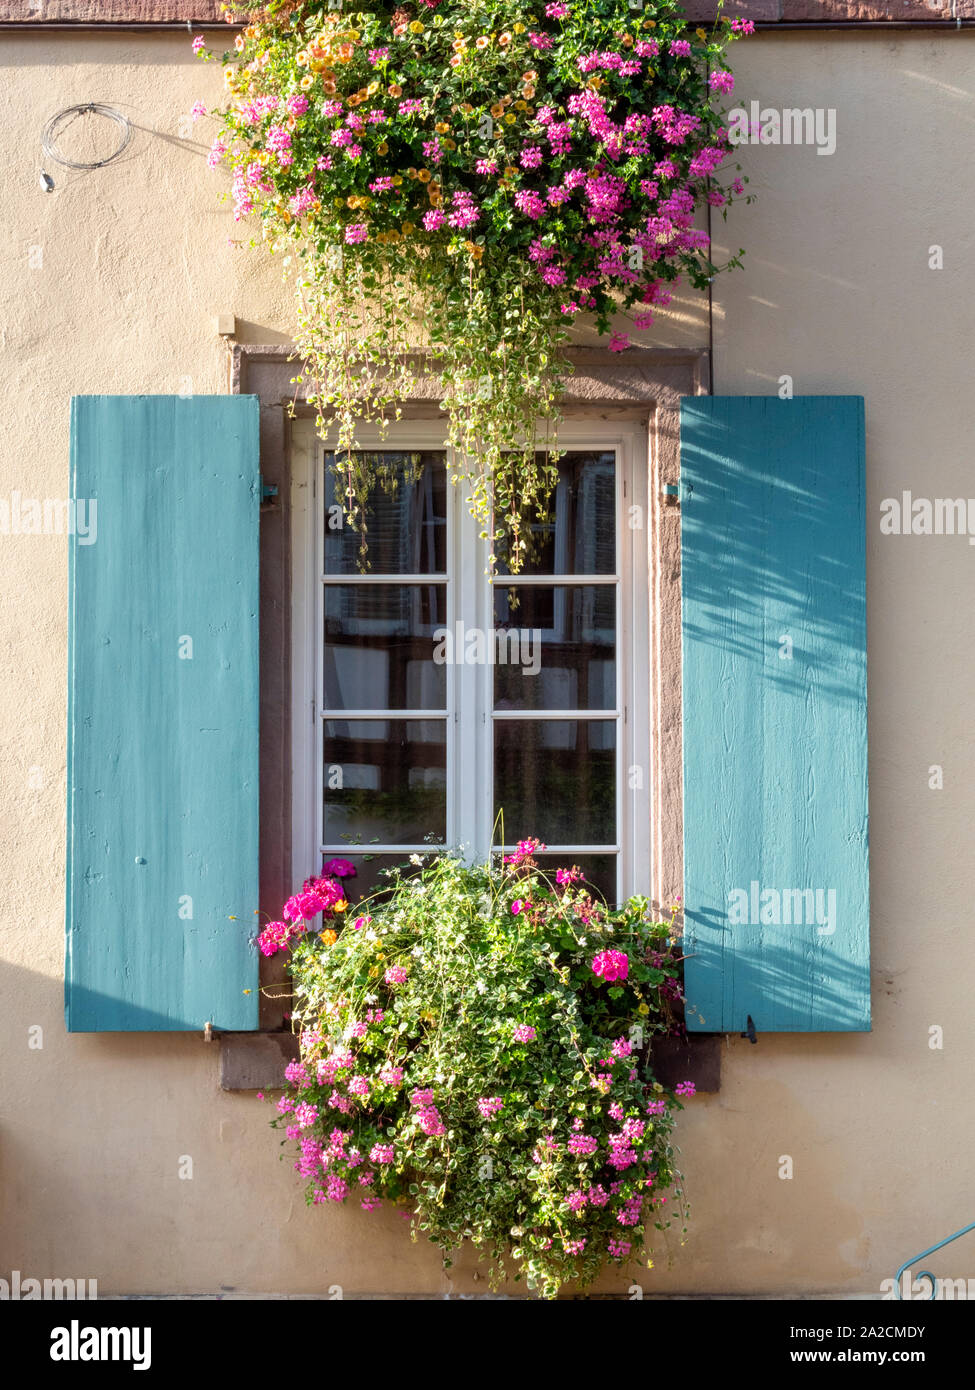 An old french window with shutters and pretty window box full of geranium flowers in a building in Eguisheim Alsace France Stock Photo